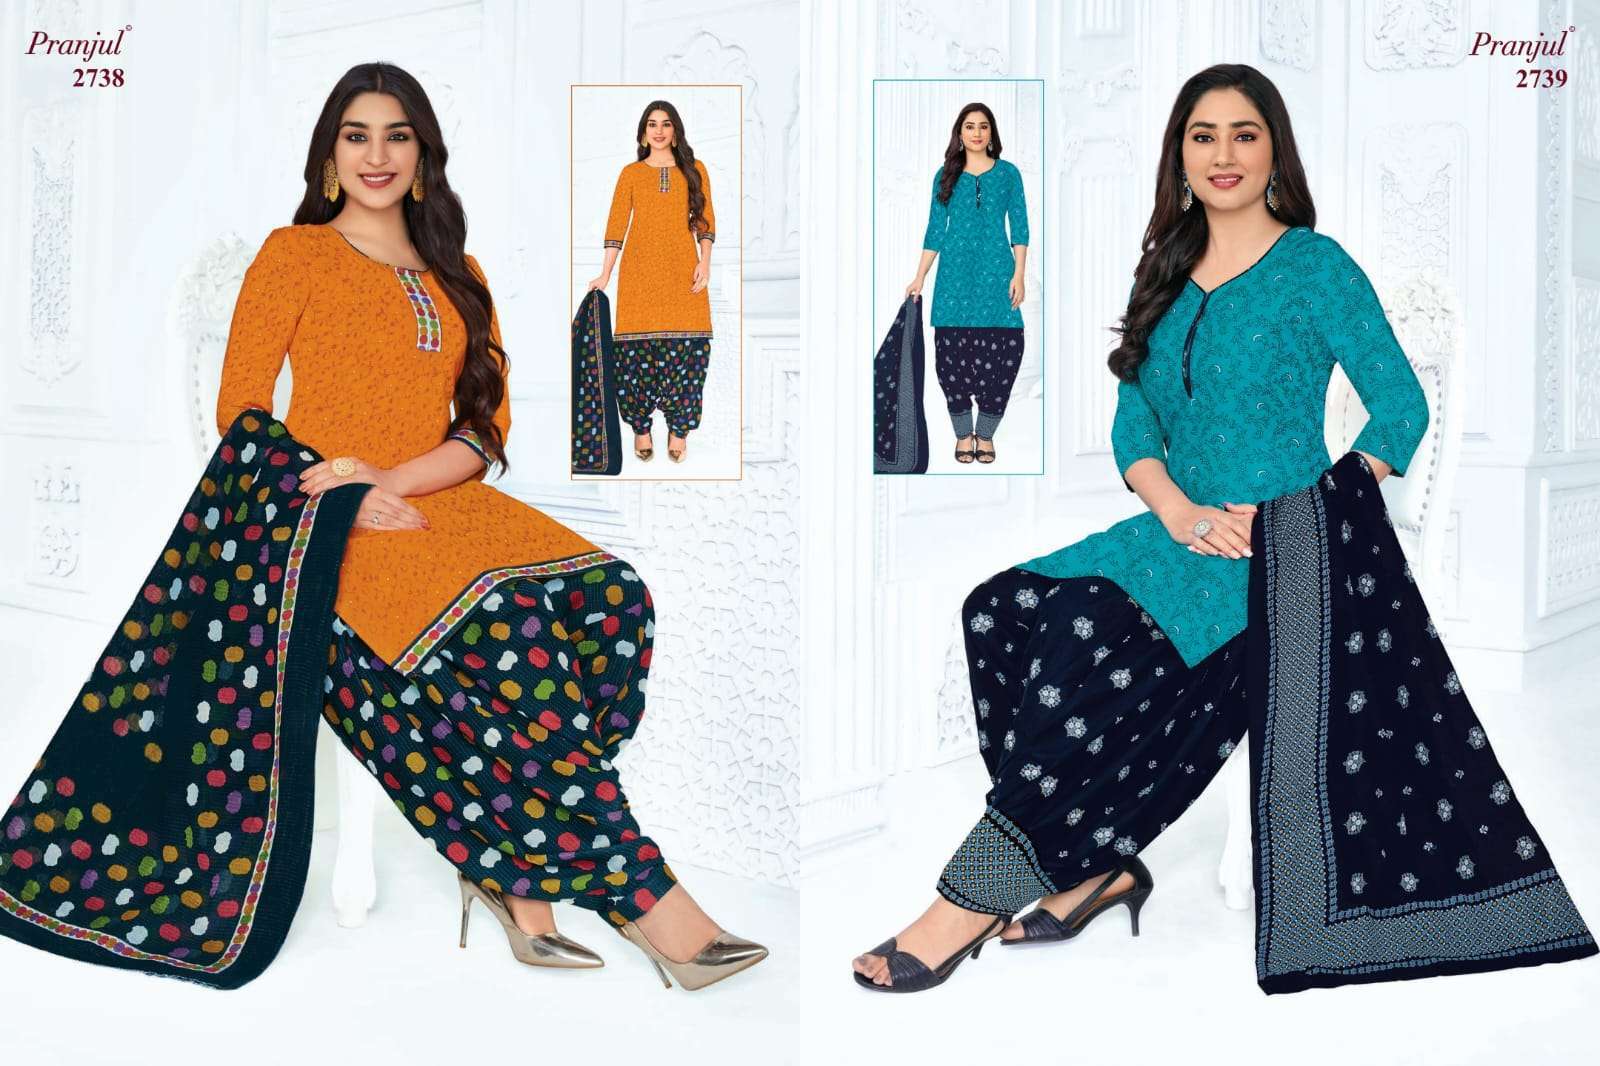 Readymade-salwar-suits, Fully-stitched-salwar-suits, Readymade-salwar-suit-wholesale,  Salwar-suit-online-shopping, Readymade-salwar-suit-uk, Punjabi-readymade- salwar-suit, Party-wear-readymade-salwar-suit